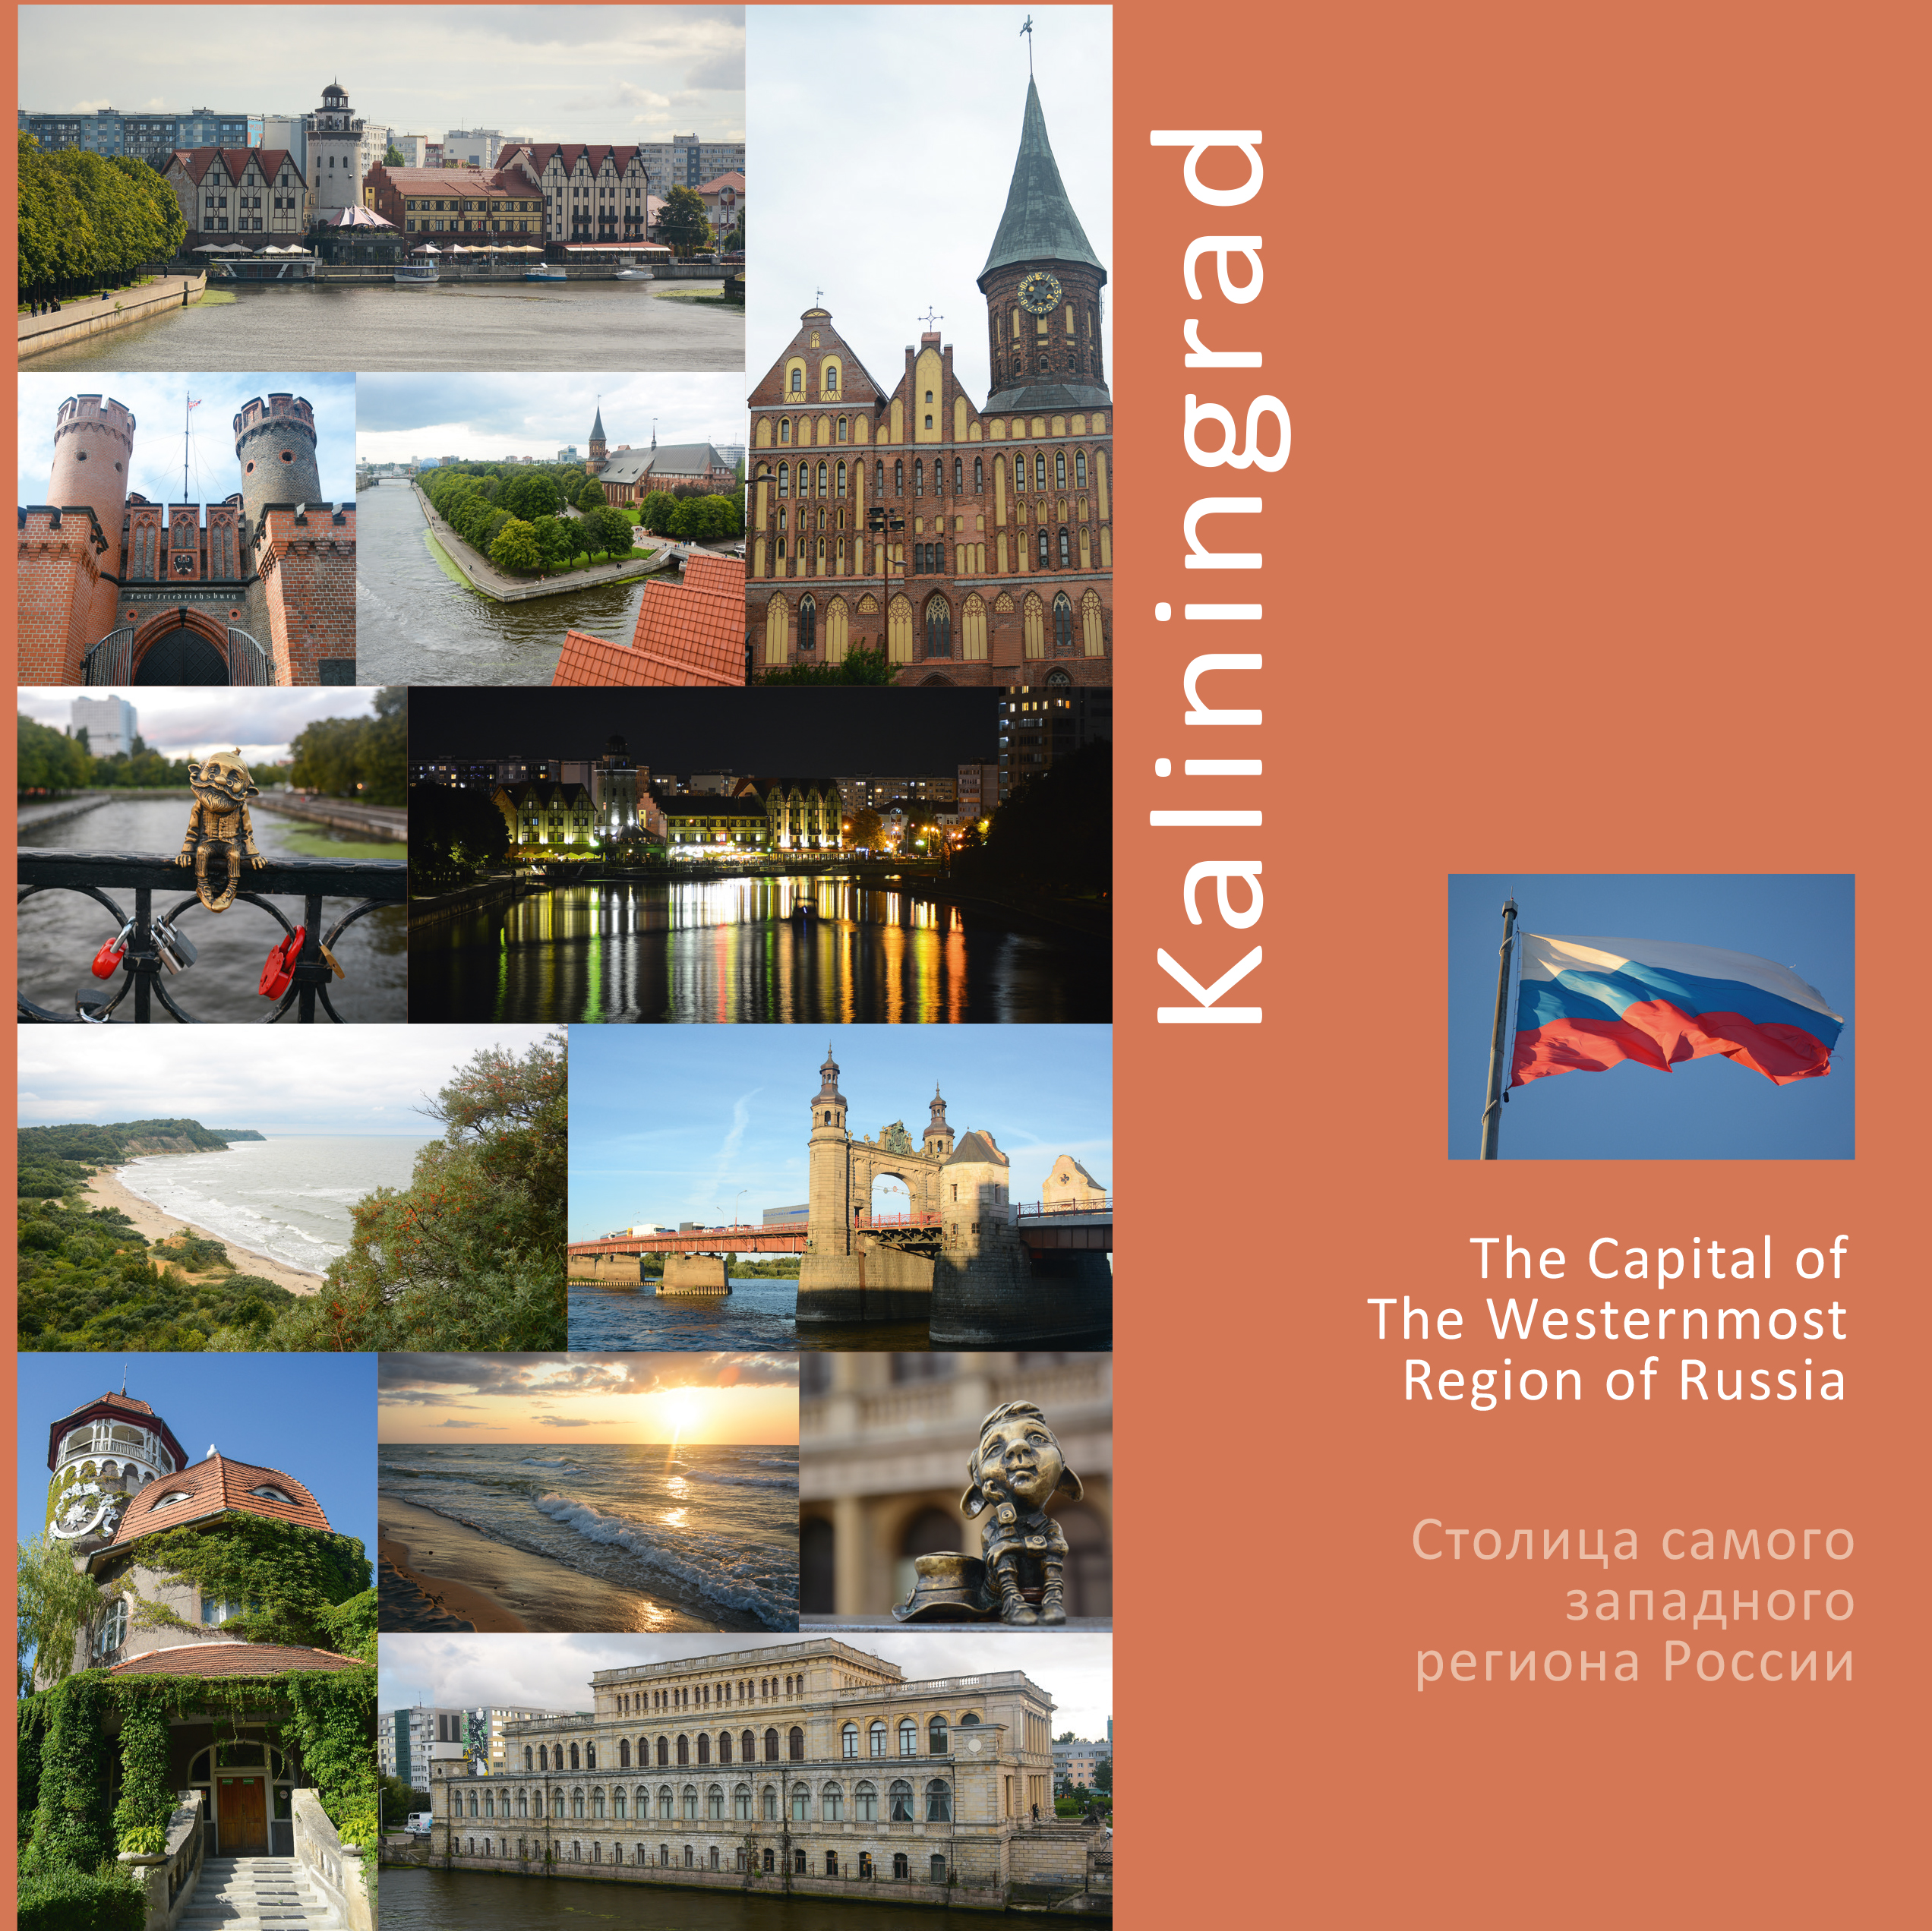 Kaliningrad: The Capital of The Westernmost Region of Russia